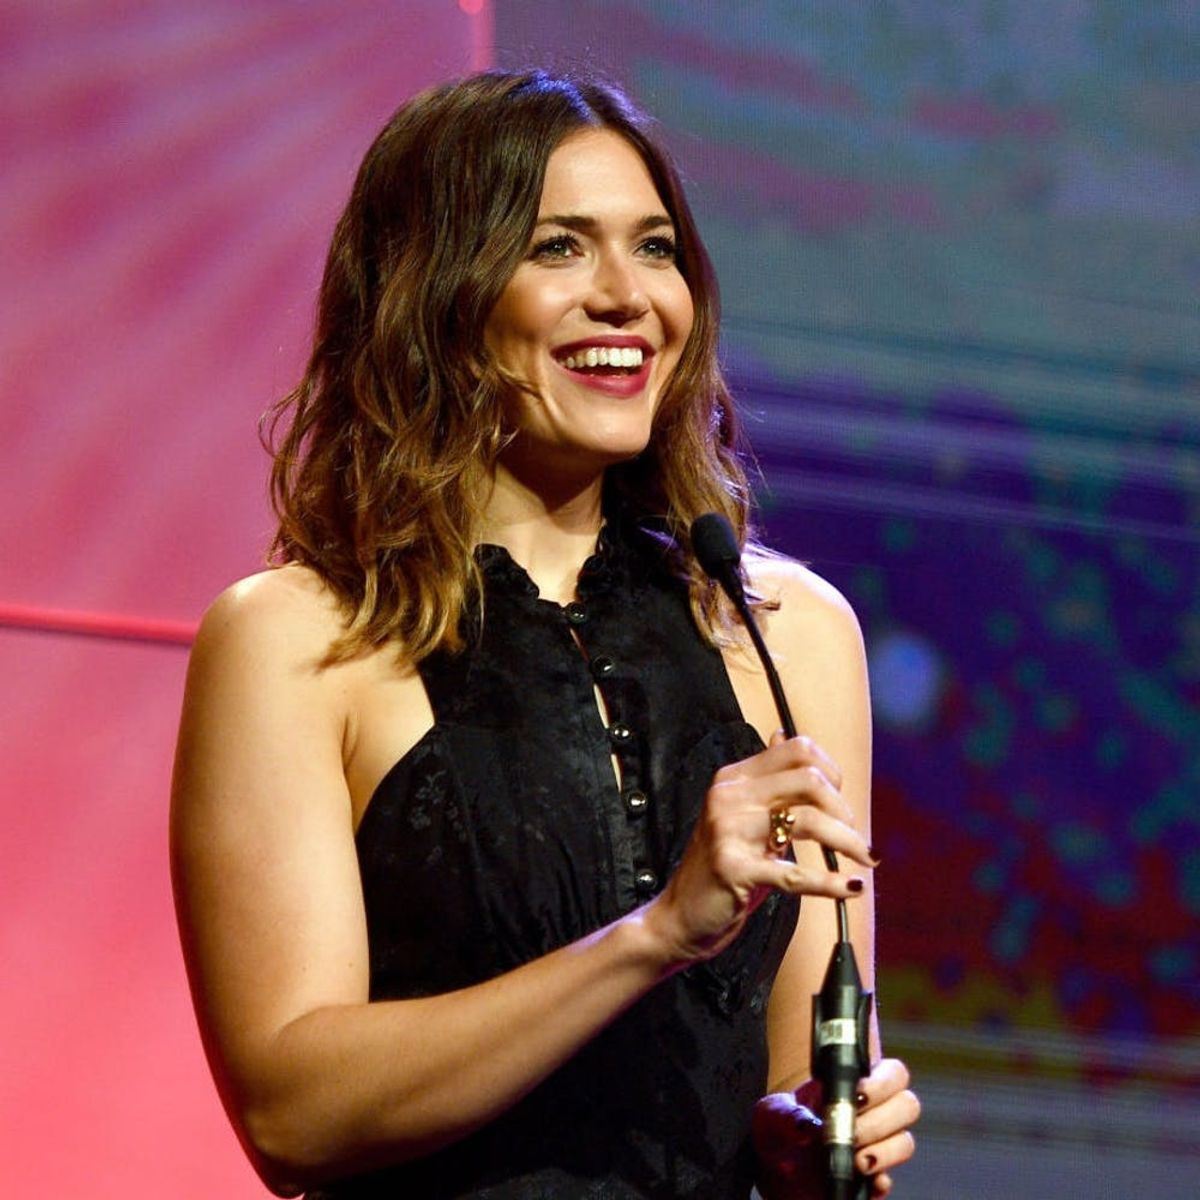 Mandy Moore Opens Up About Building a Home With BF Taylor Goldsmith